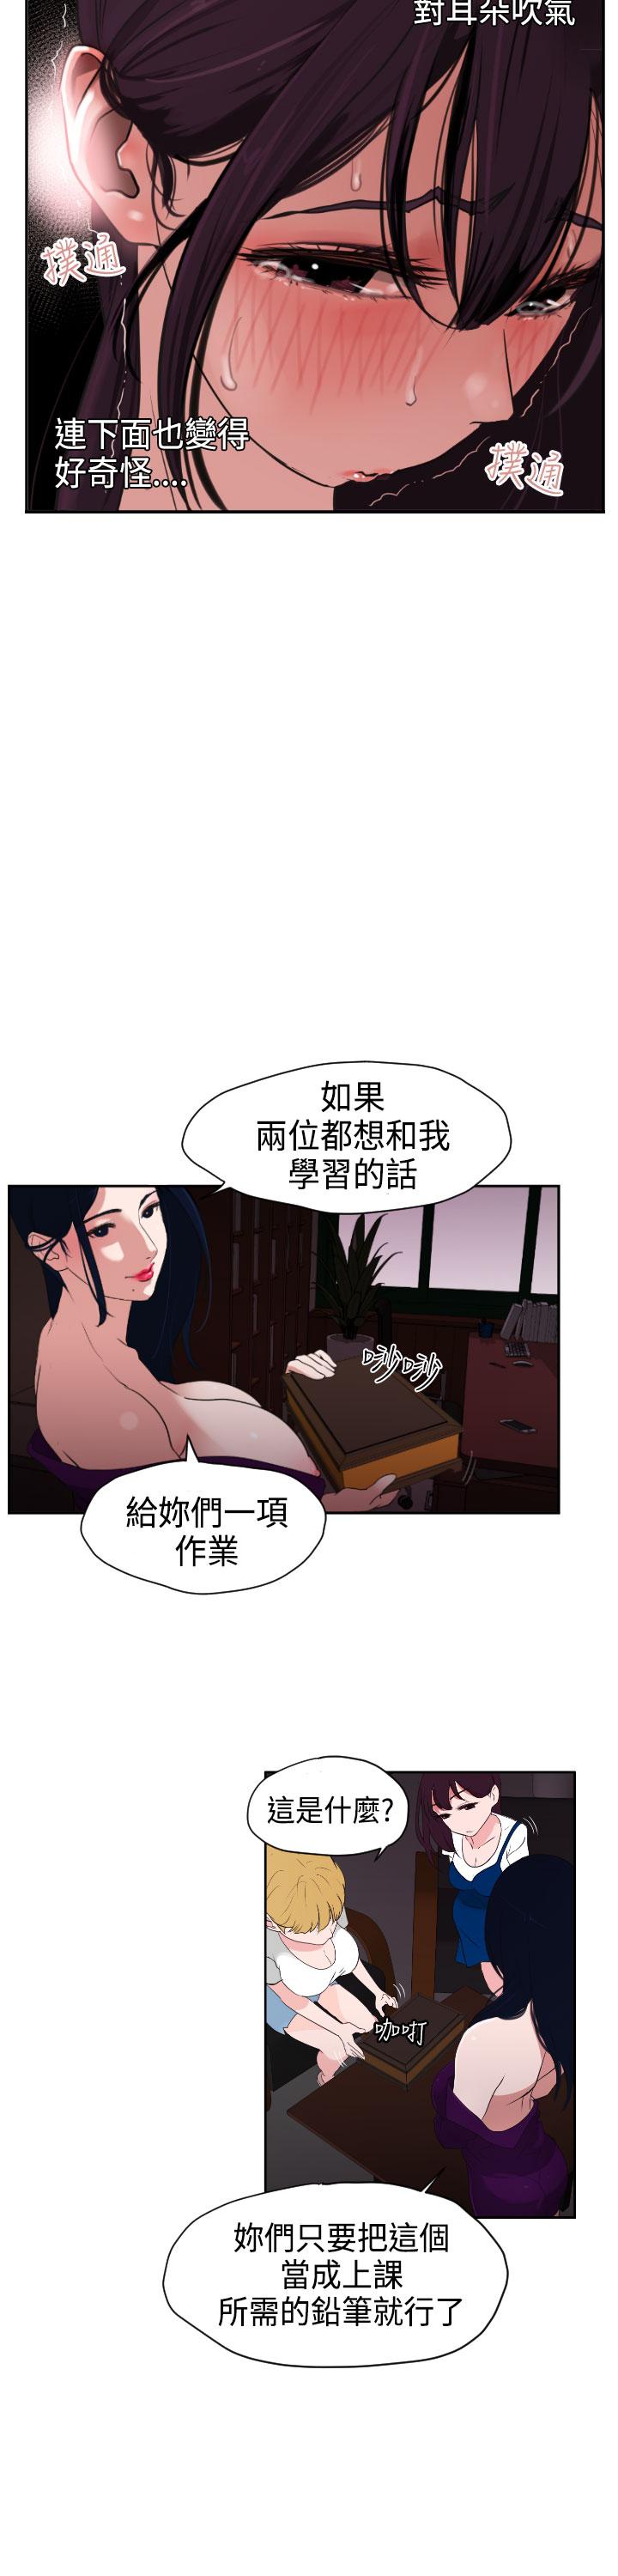 Desire King (慾求王) Ch.1-4 (chinese) 102